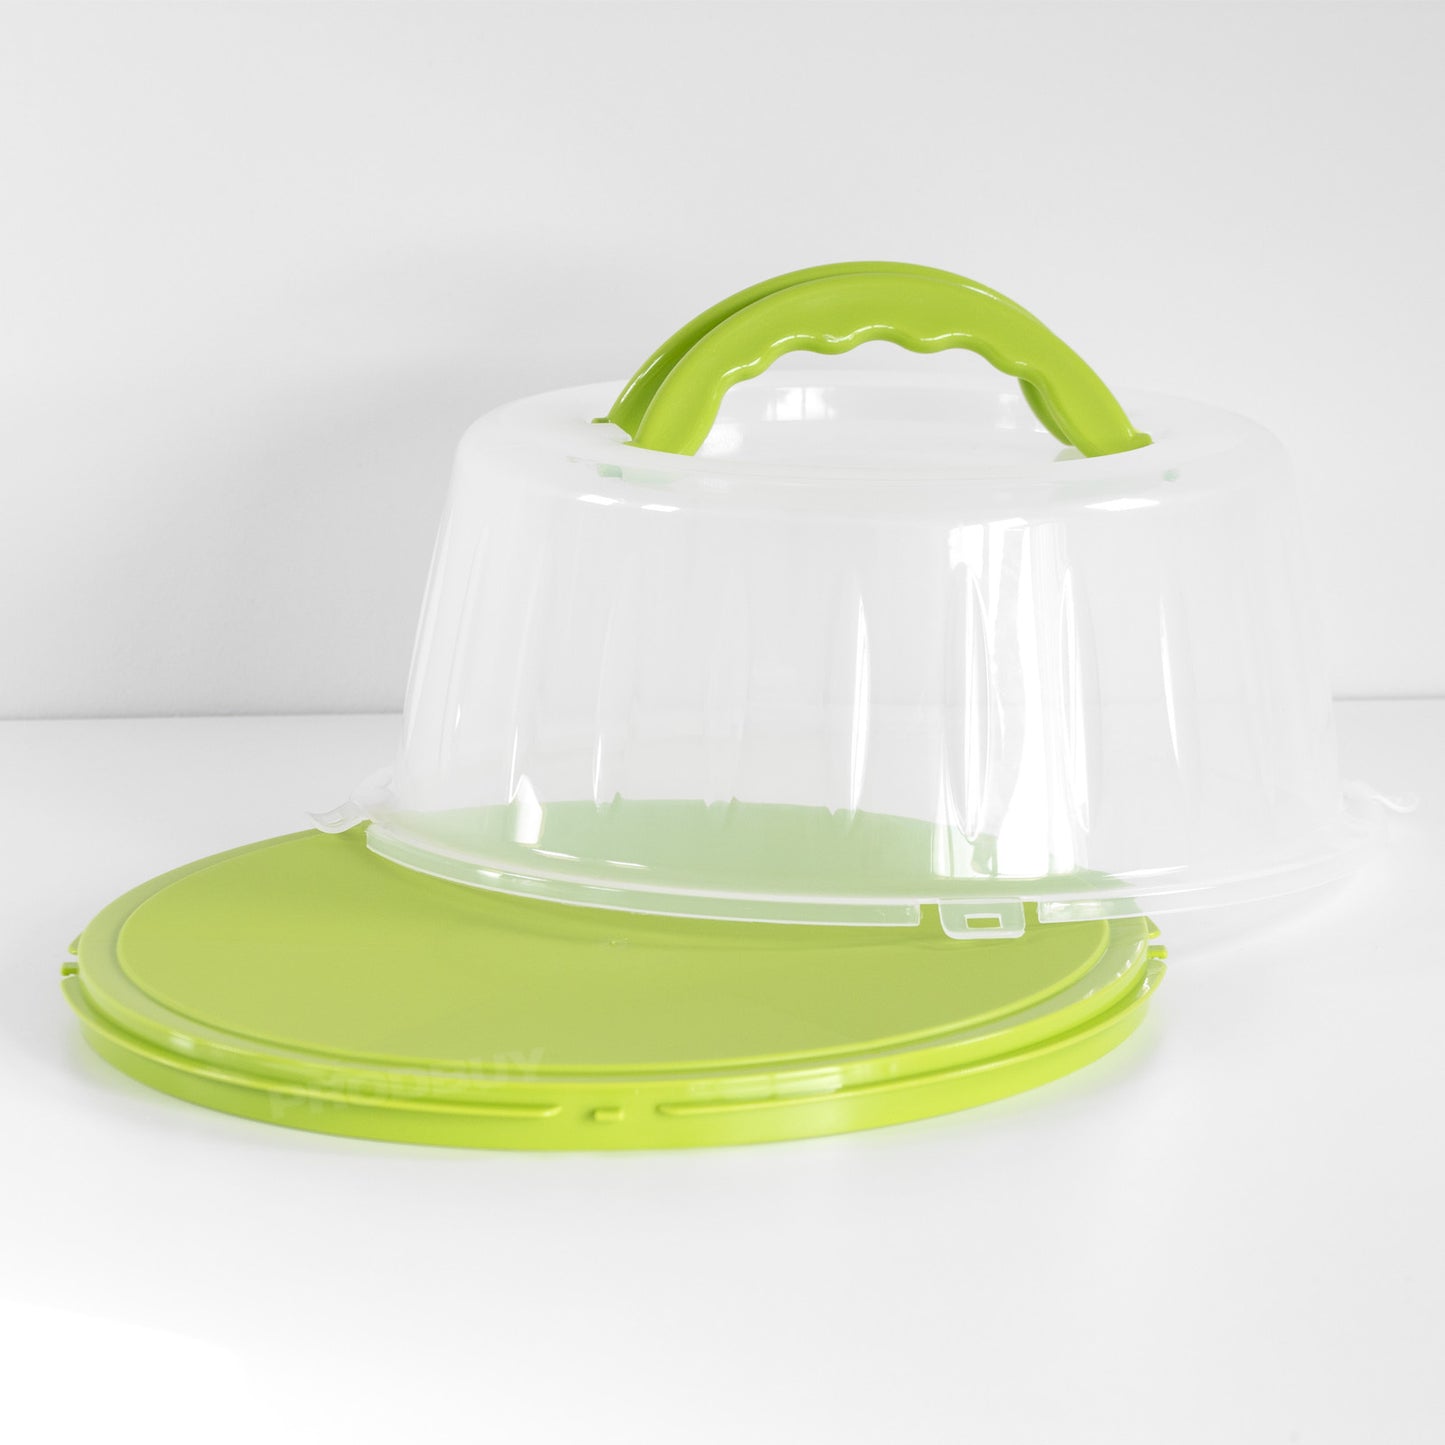 33.2cm Round Cake Carrier with Clip on Lid Cover